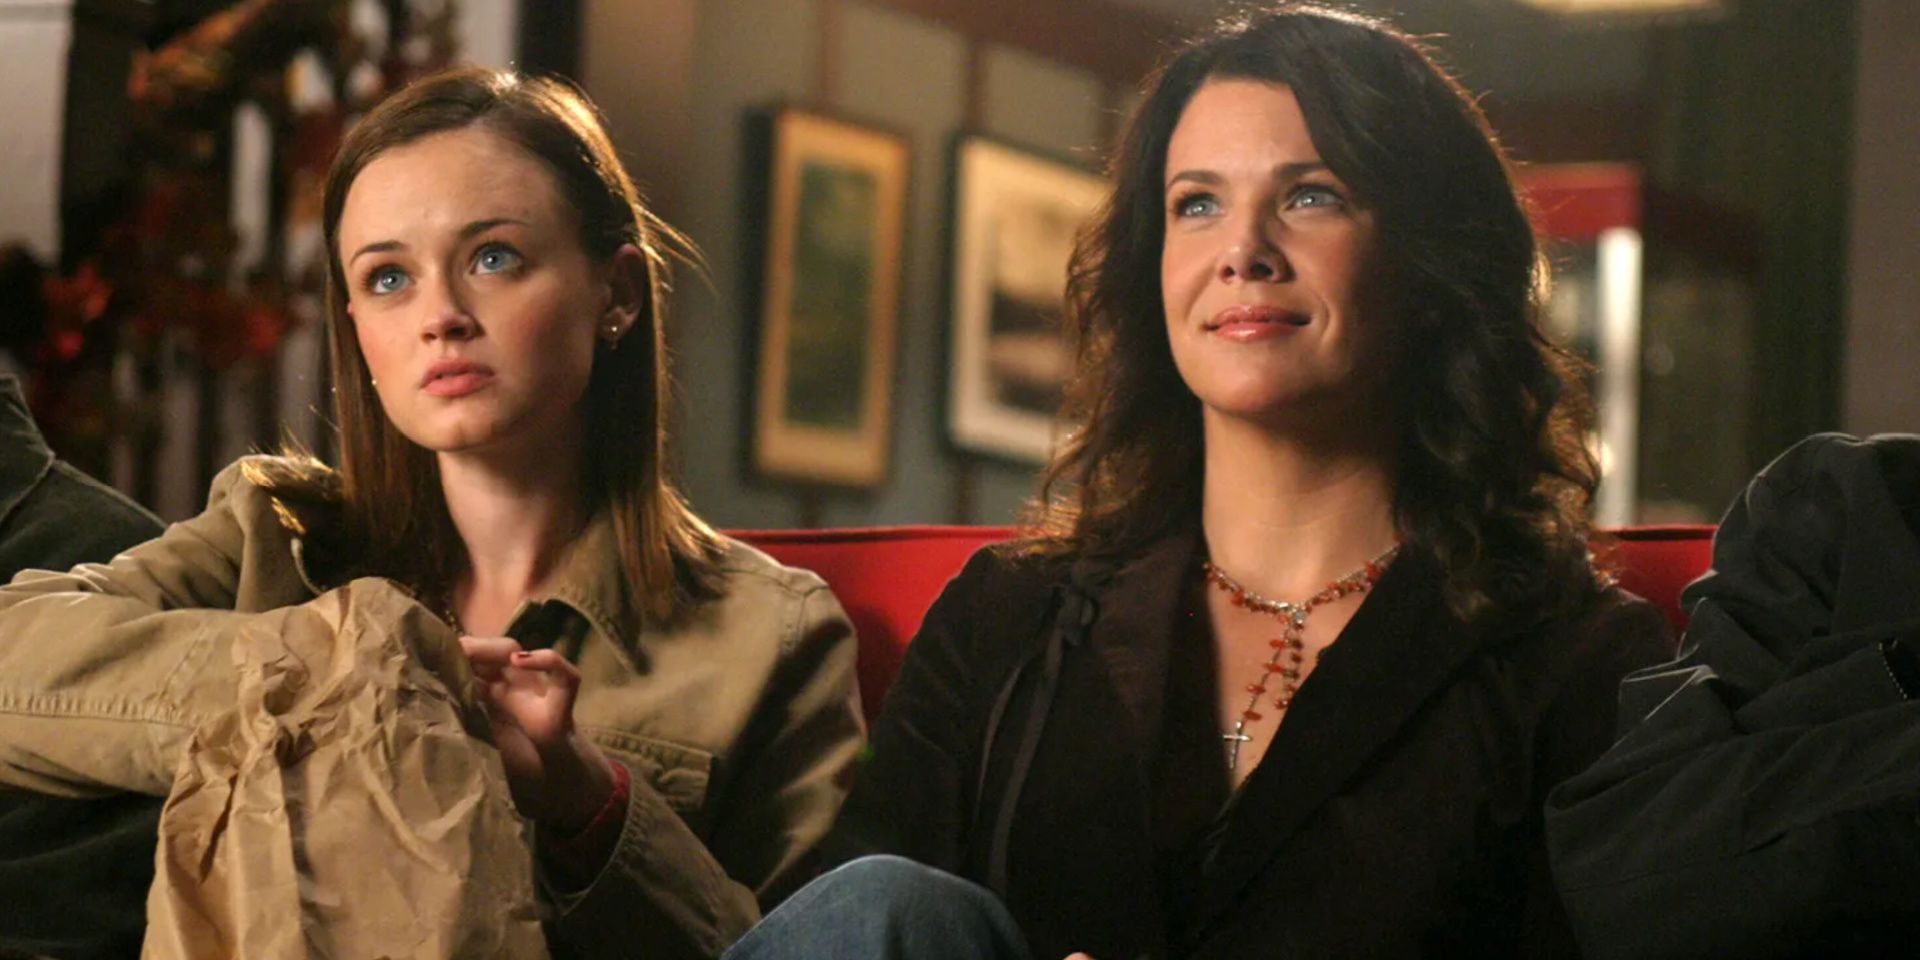 Lorelai Gilmore sits in Gilmore Girls with her daughter Rory.